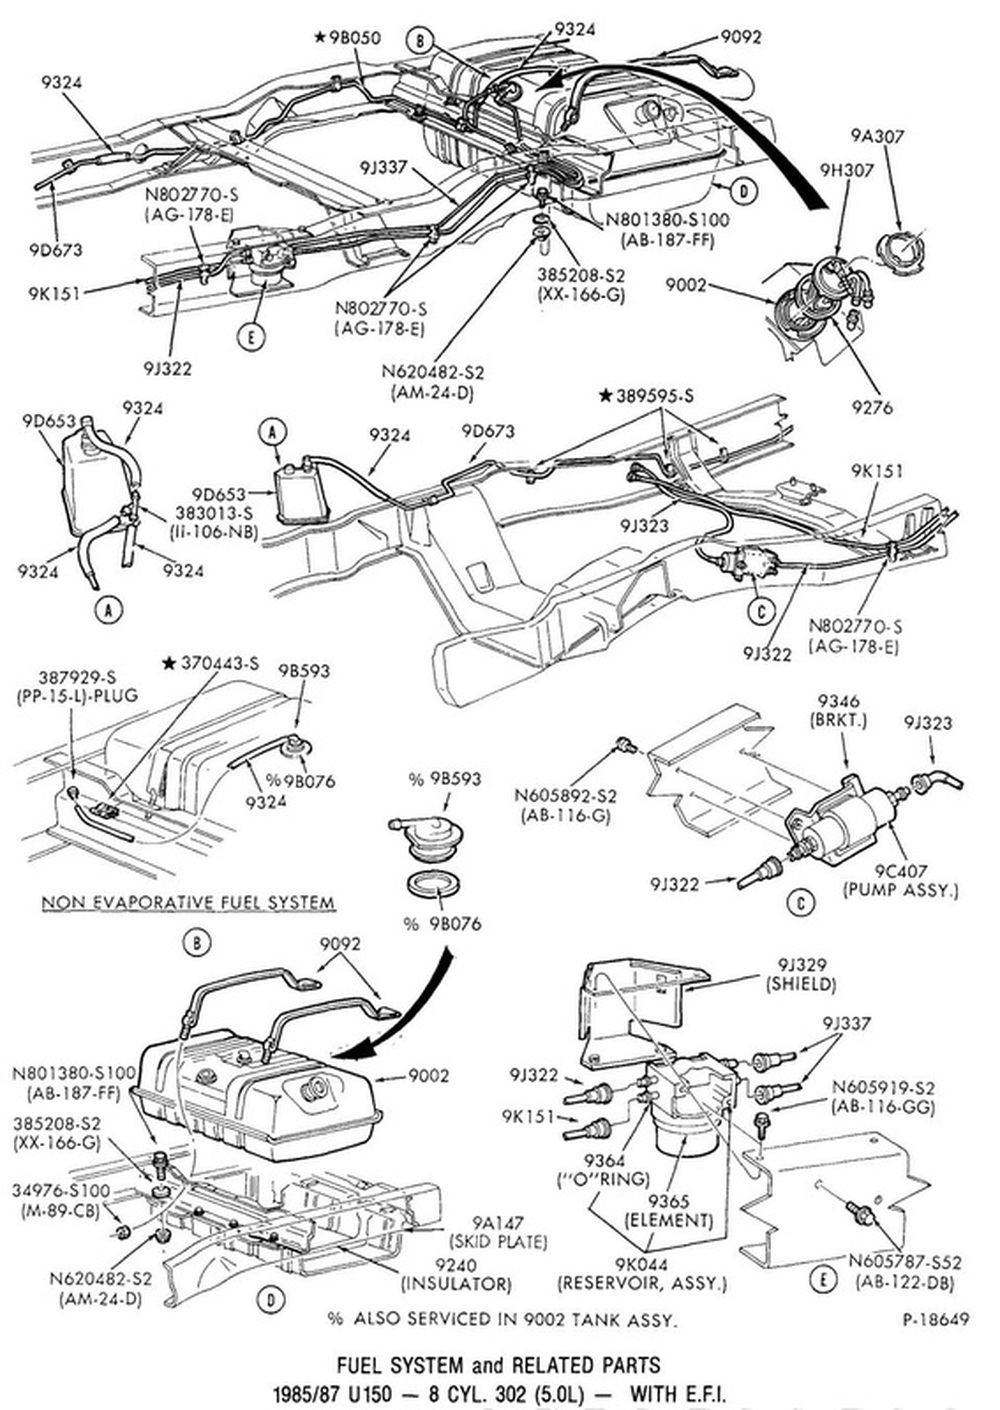 1989 Ford Bronco Fuel System Diagram Full Hd Version